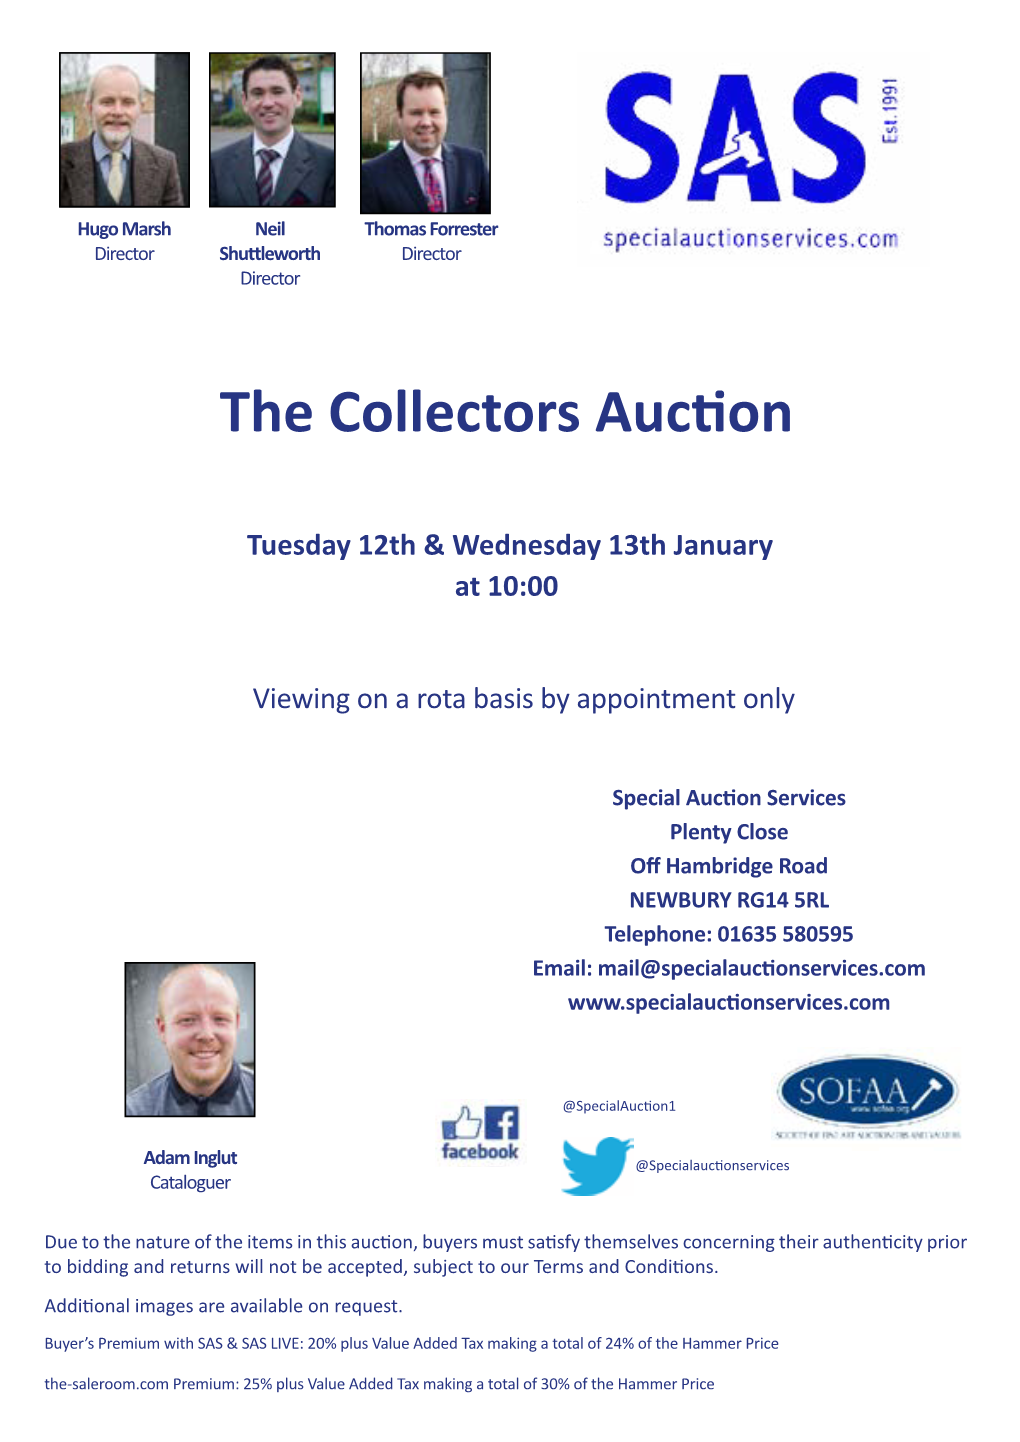 The Collectors Auction